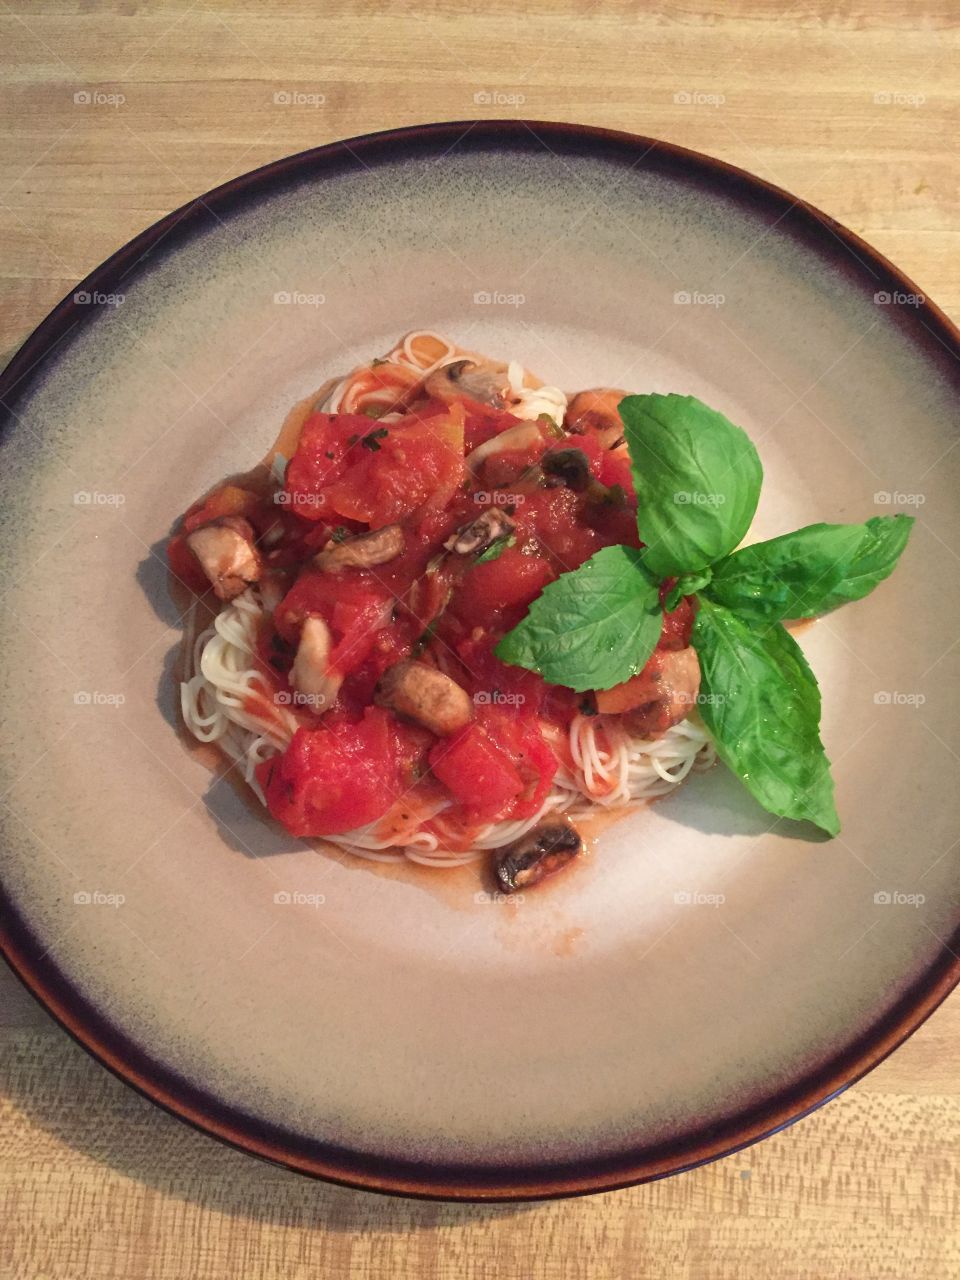 Angel hair pasta with tomatoes, mushrooms and basil